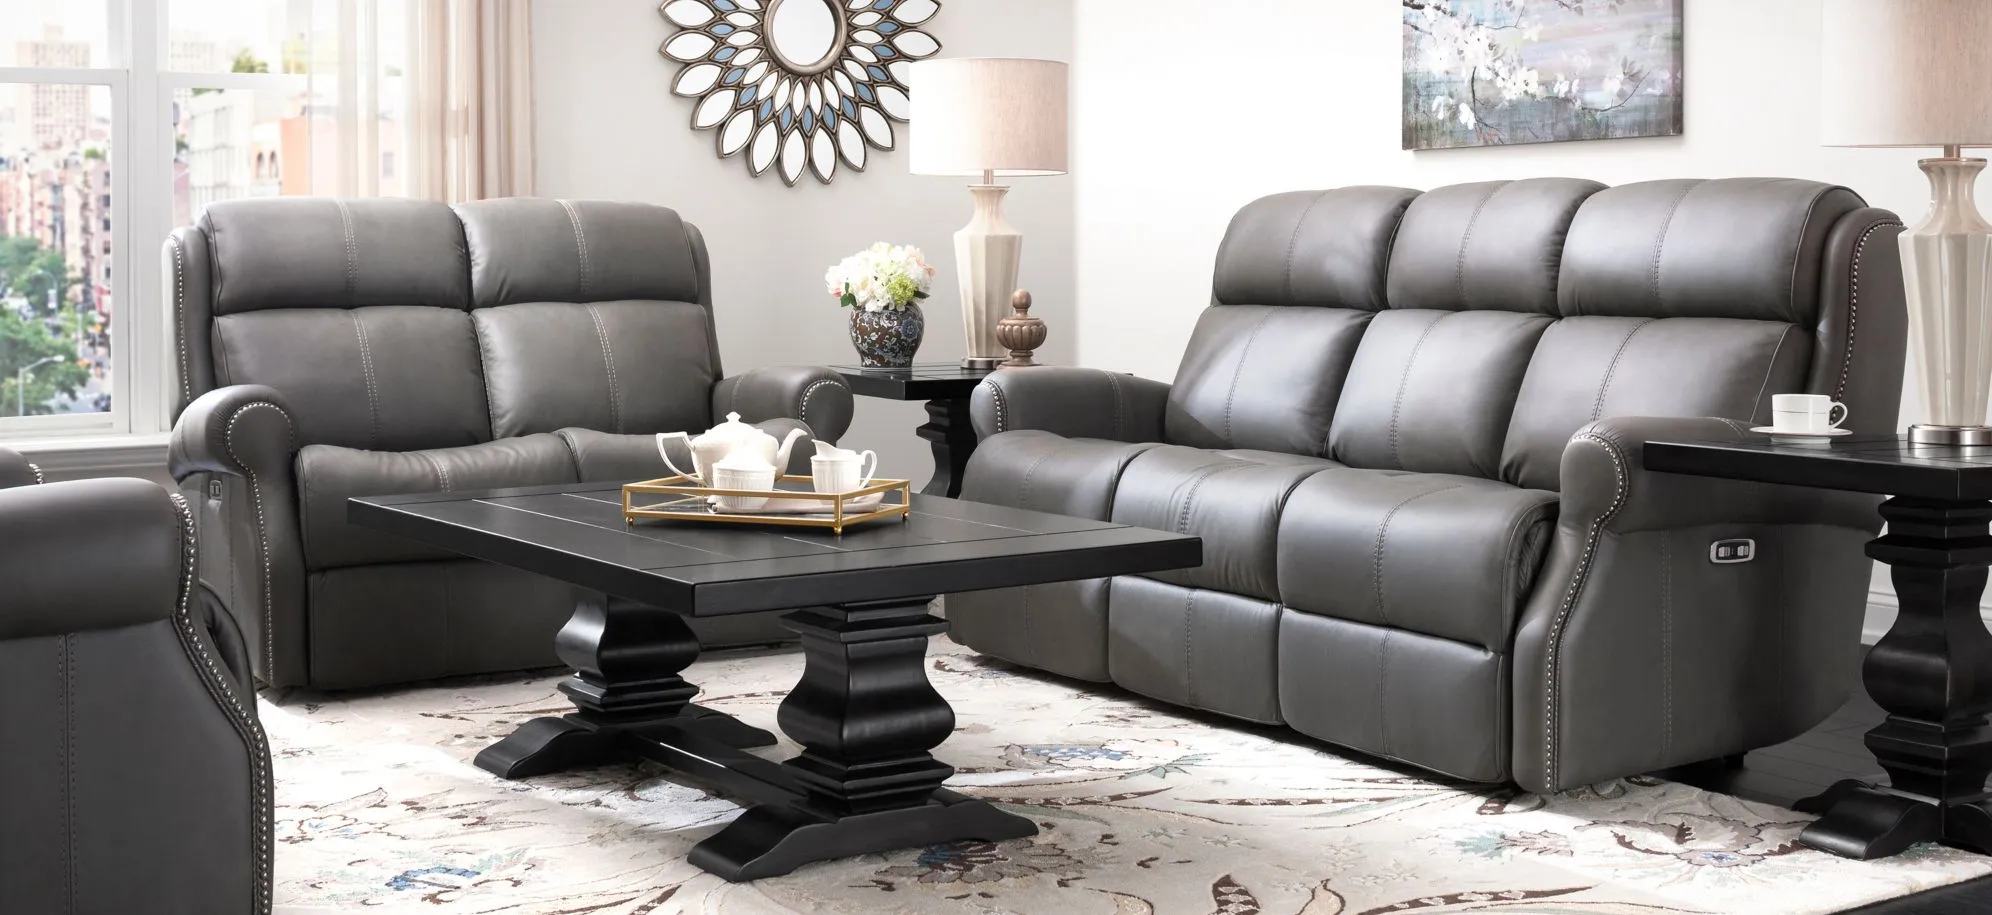 Cabella Living Room Set in Gray by Bernhardt